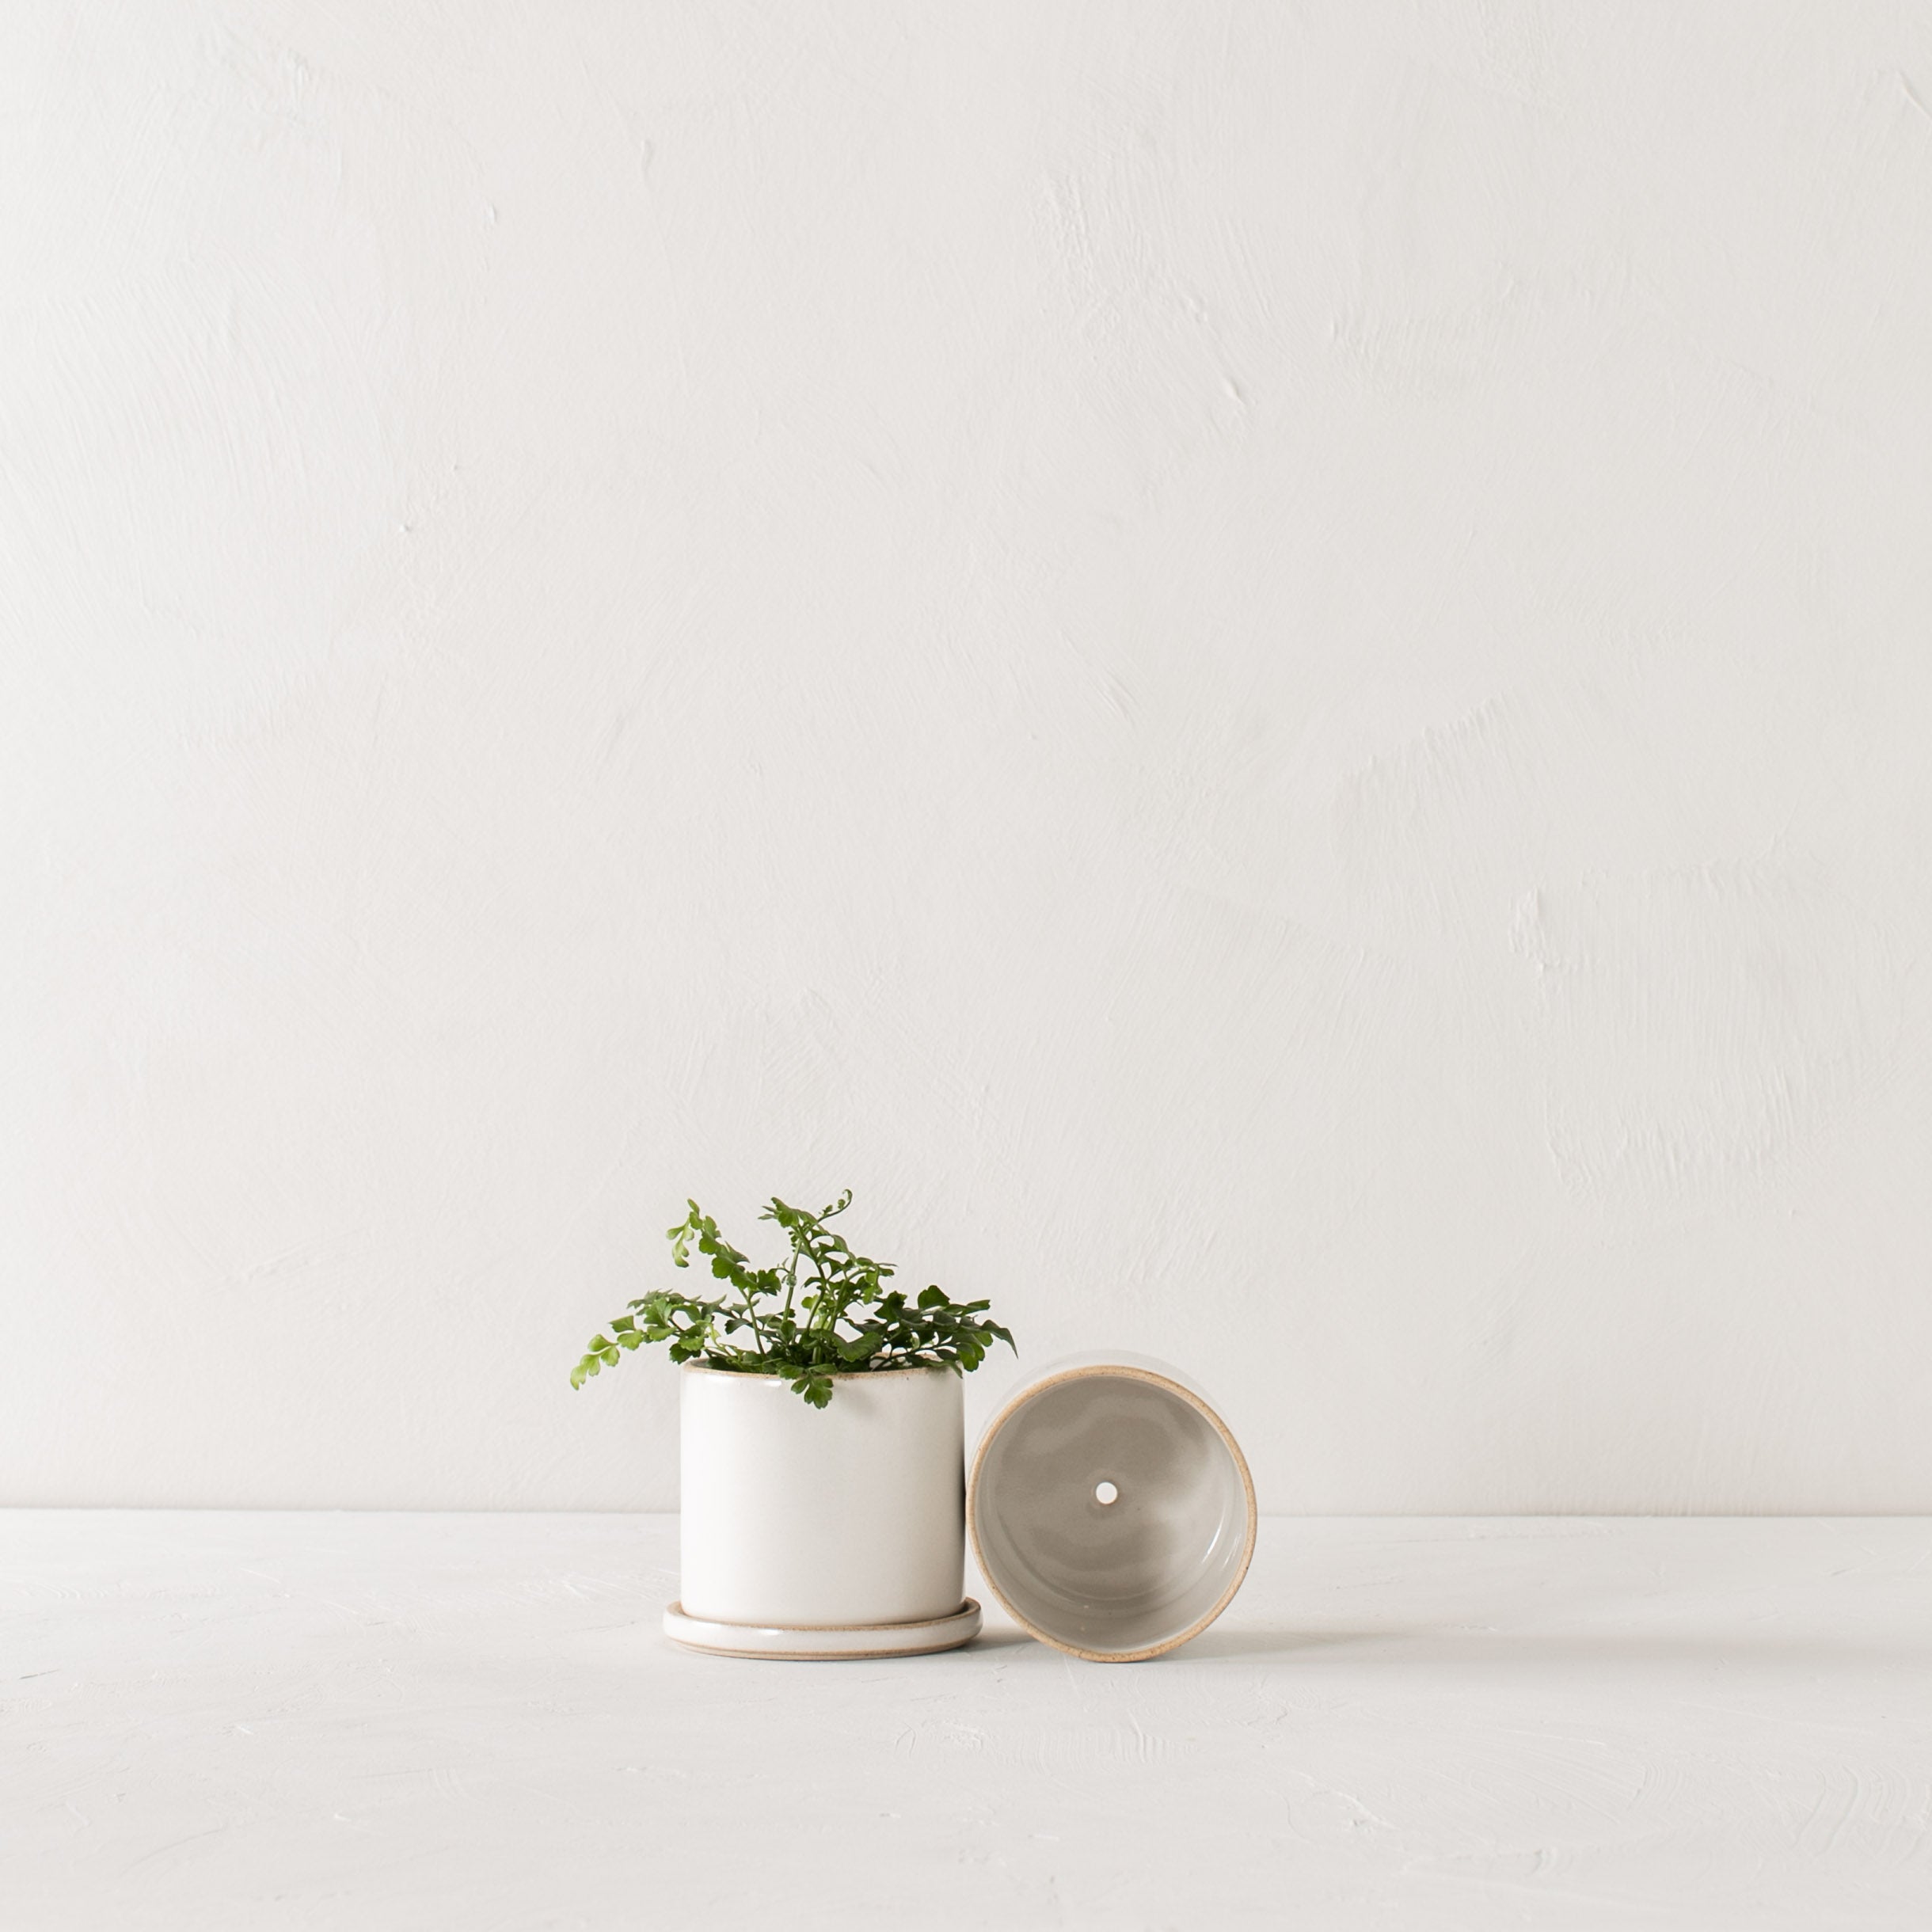 Two minimal white ceramic planters side by side. 4 inch planter and bottom dish stood upright, the other laying on its side to show off the drainage hole. Handmade ceramic planter, designed and sold by Convivial Production, Kansas City ceramics.